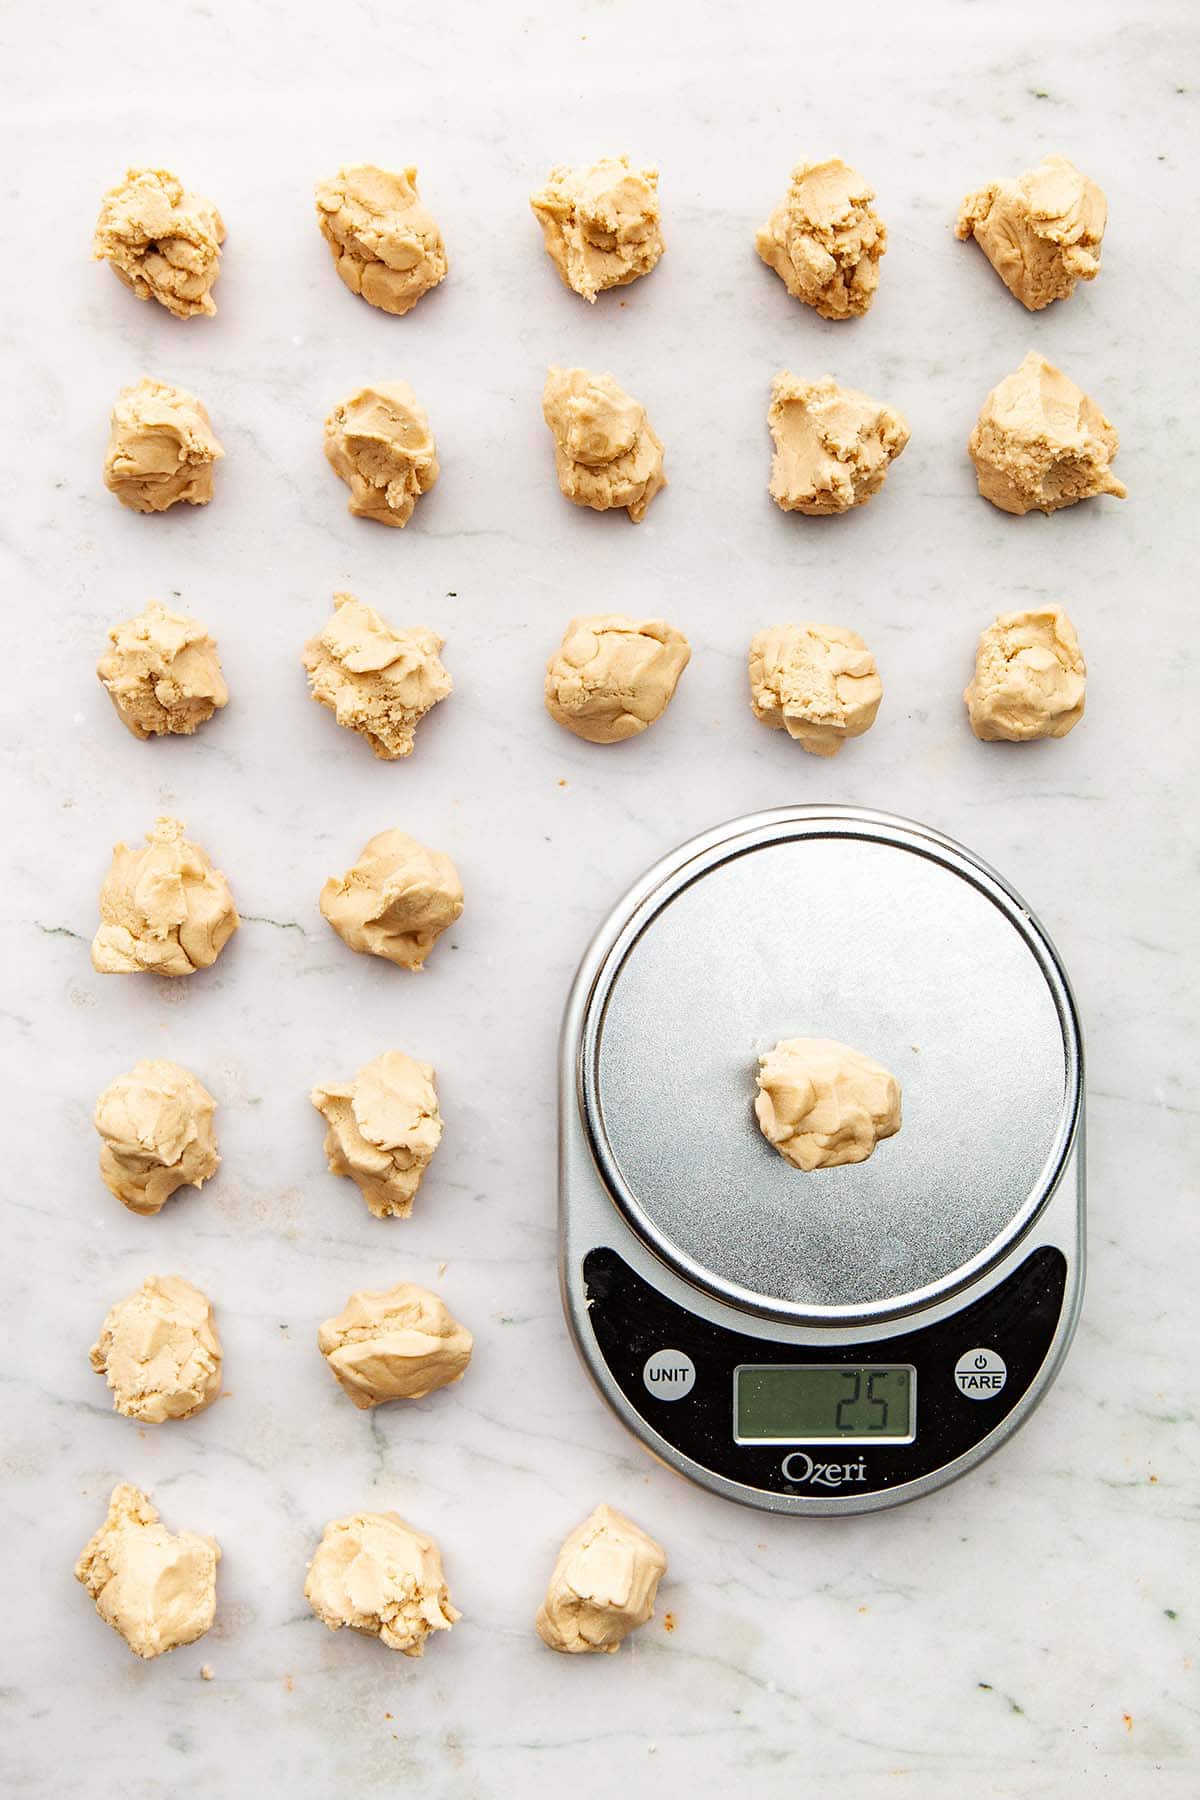 Two dozen portions of dough at 25 grams per piece with one portion on a silver digital scale.